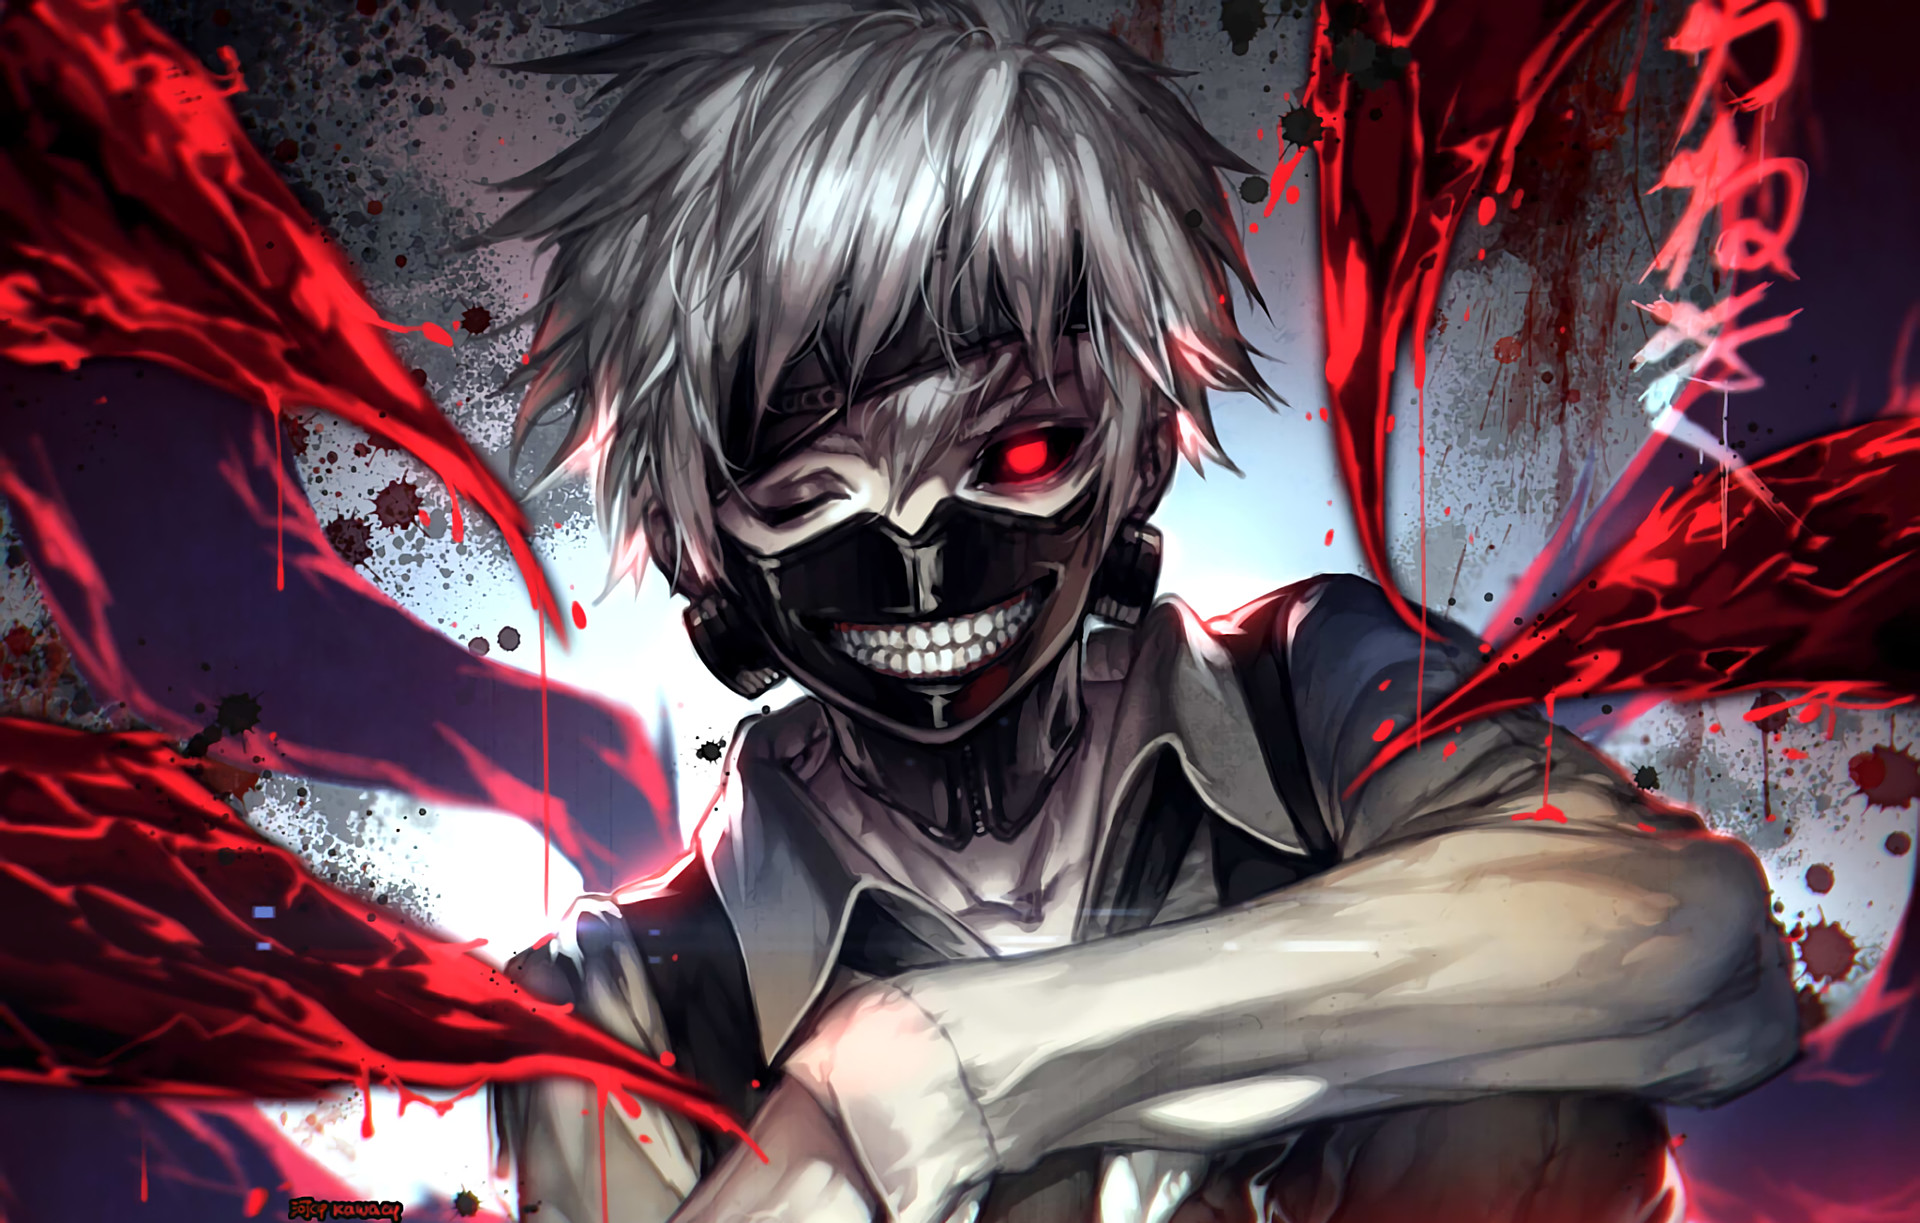 73 Bloody Anime Wallpapers on WallpaperPlay